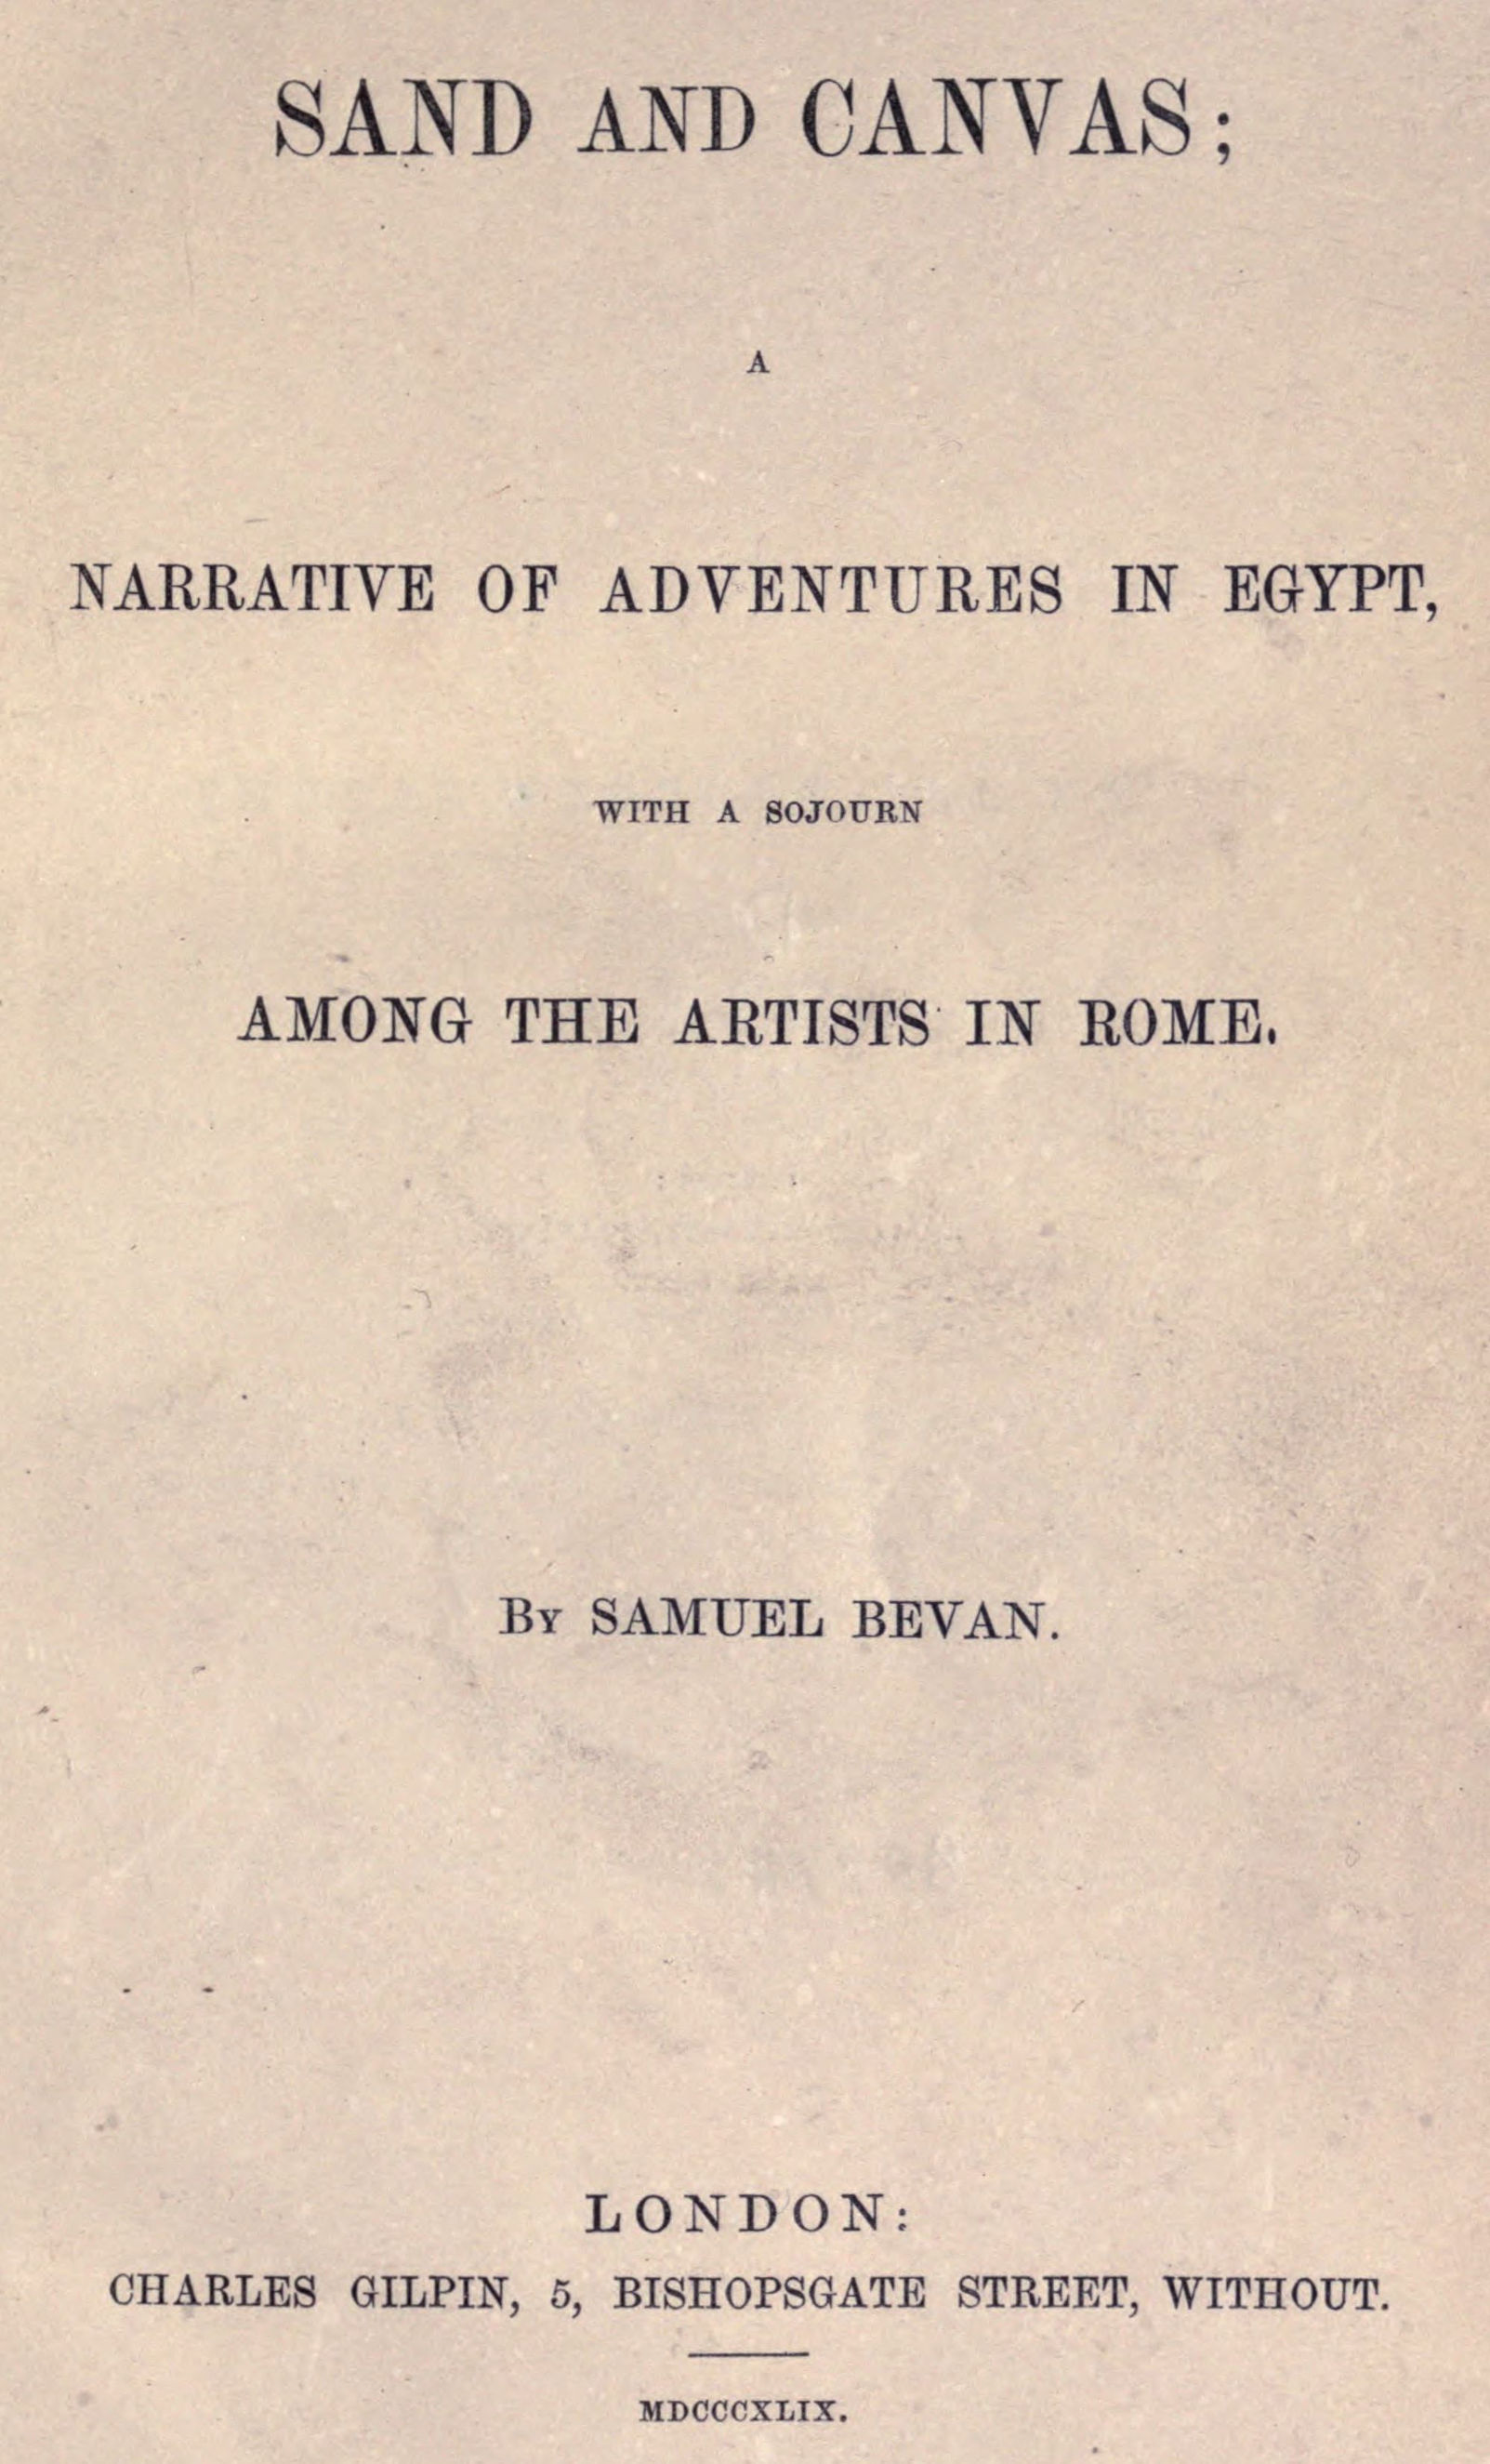 Sand and Canvas: Narrative of adventures in Egypt with a sojourn among the artists in Rome